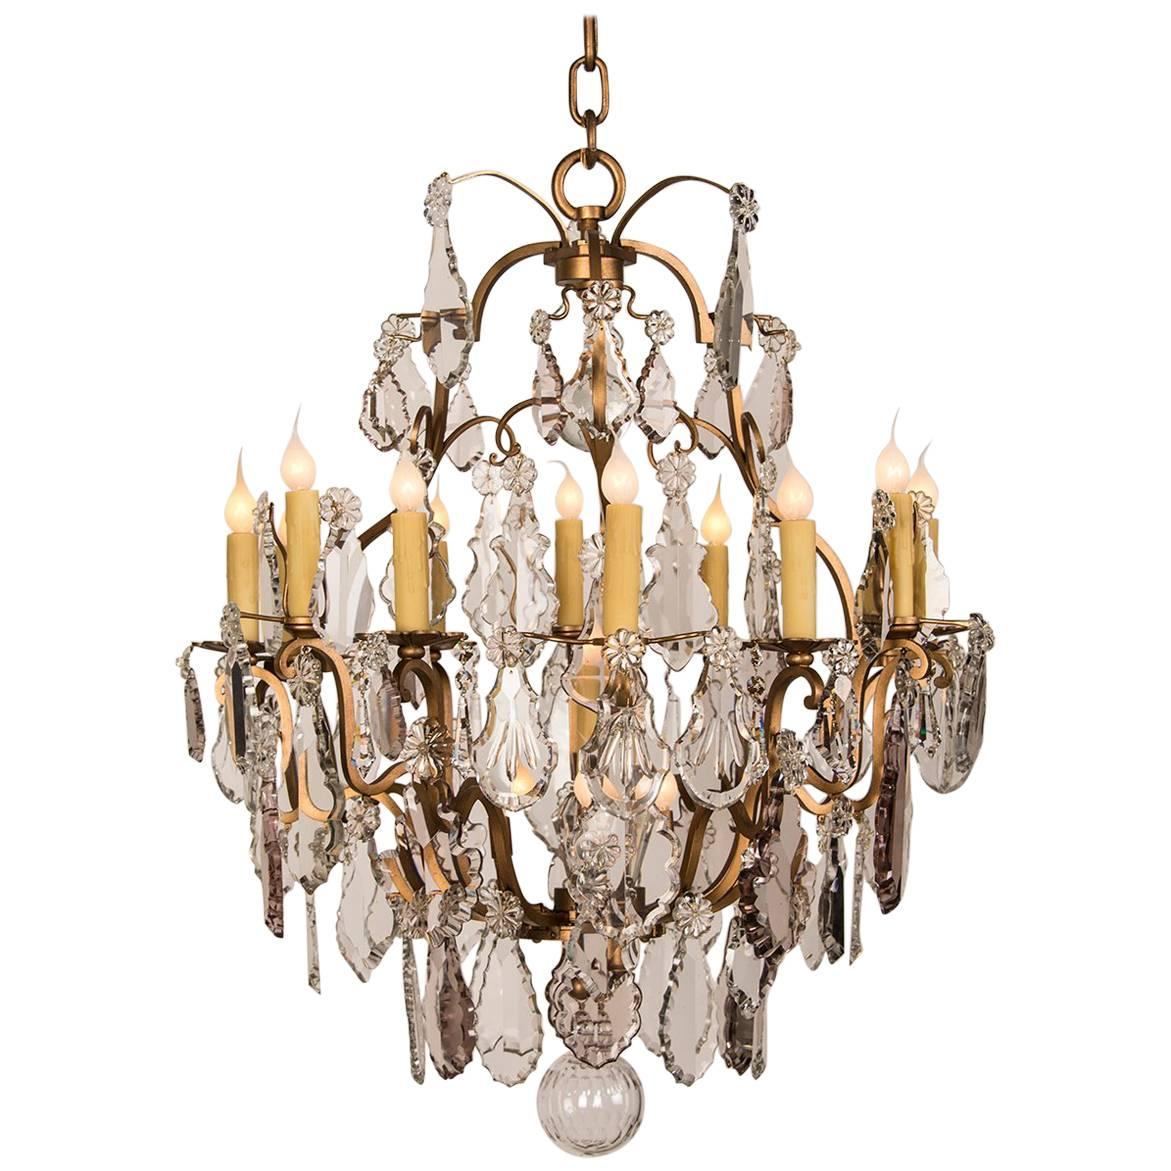 Antique French Louis XV Style Crystal Chandelier with Sixteen Lights circa 1900